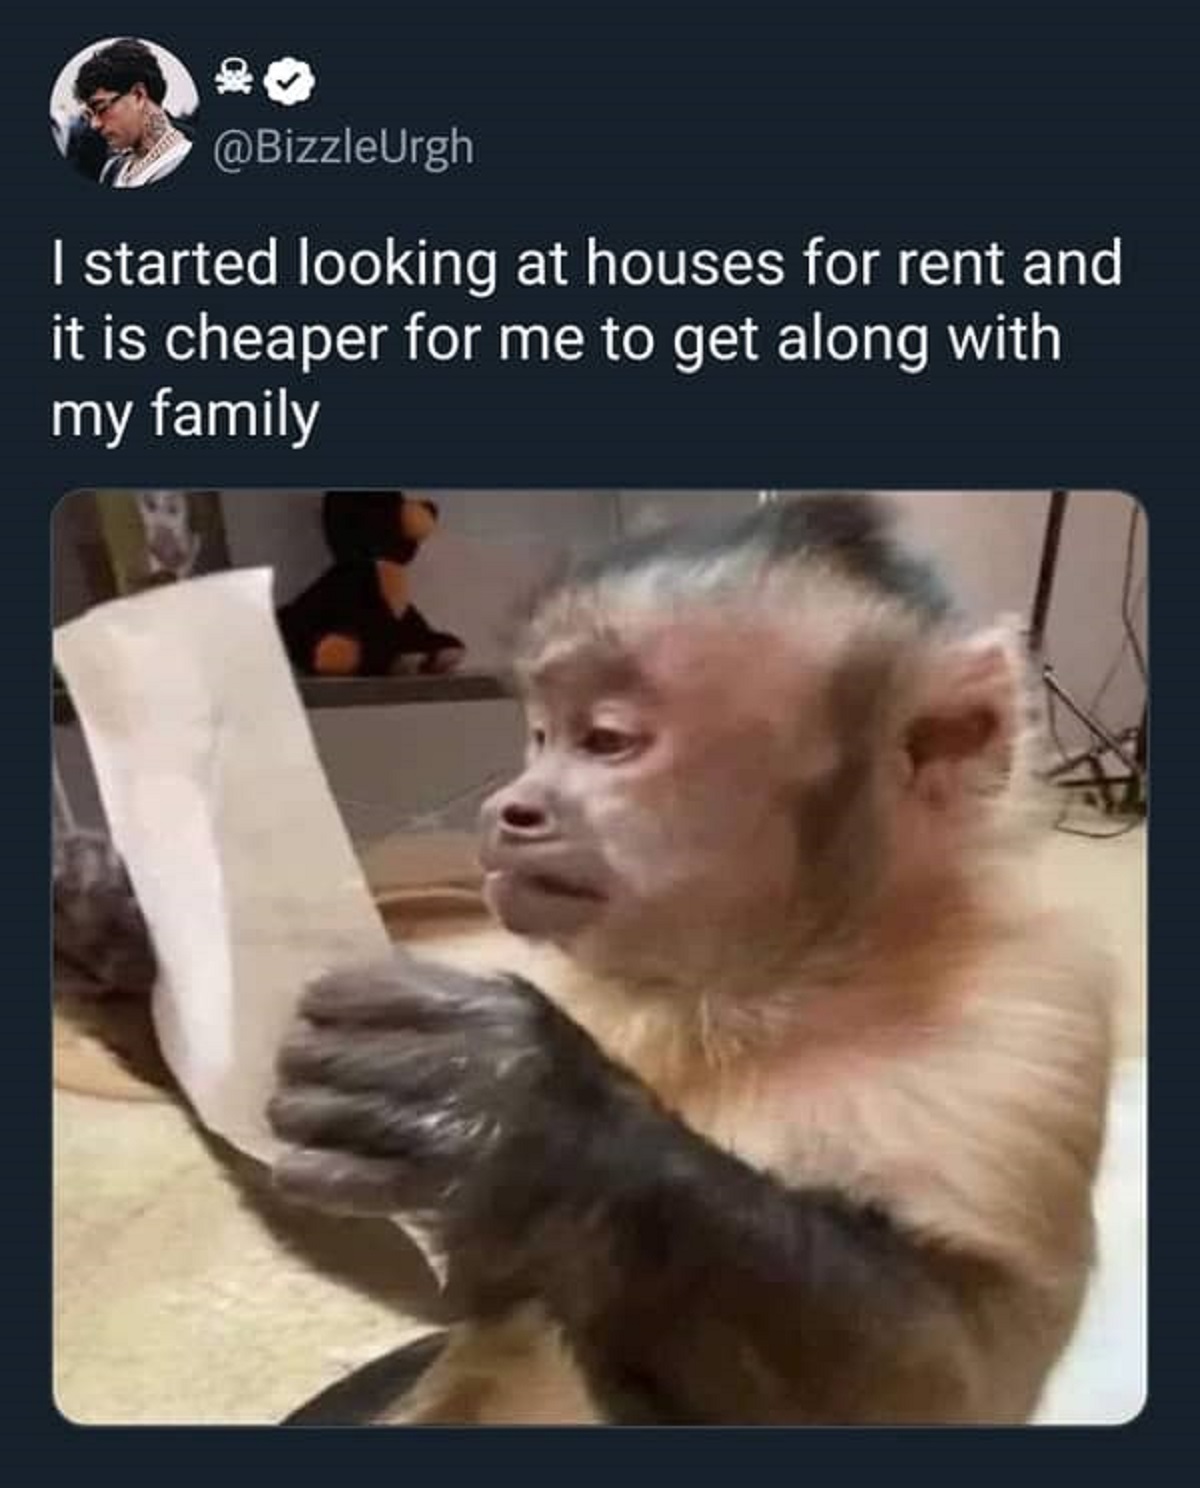 350 I started looking at houses for rent and it is cheaper for me to get along with my family